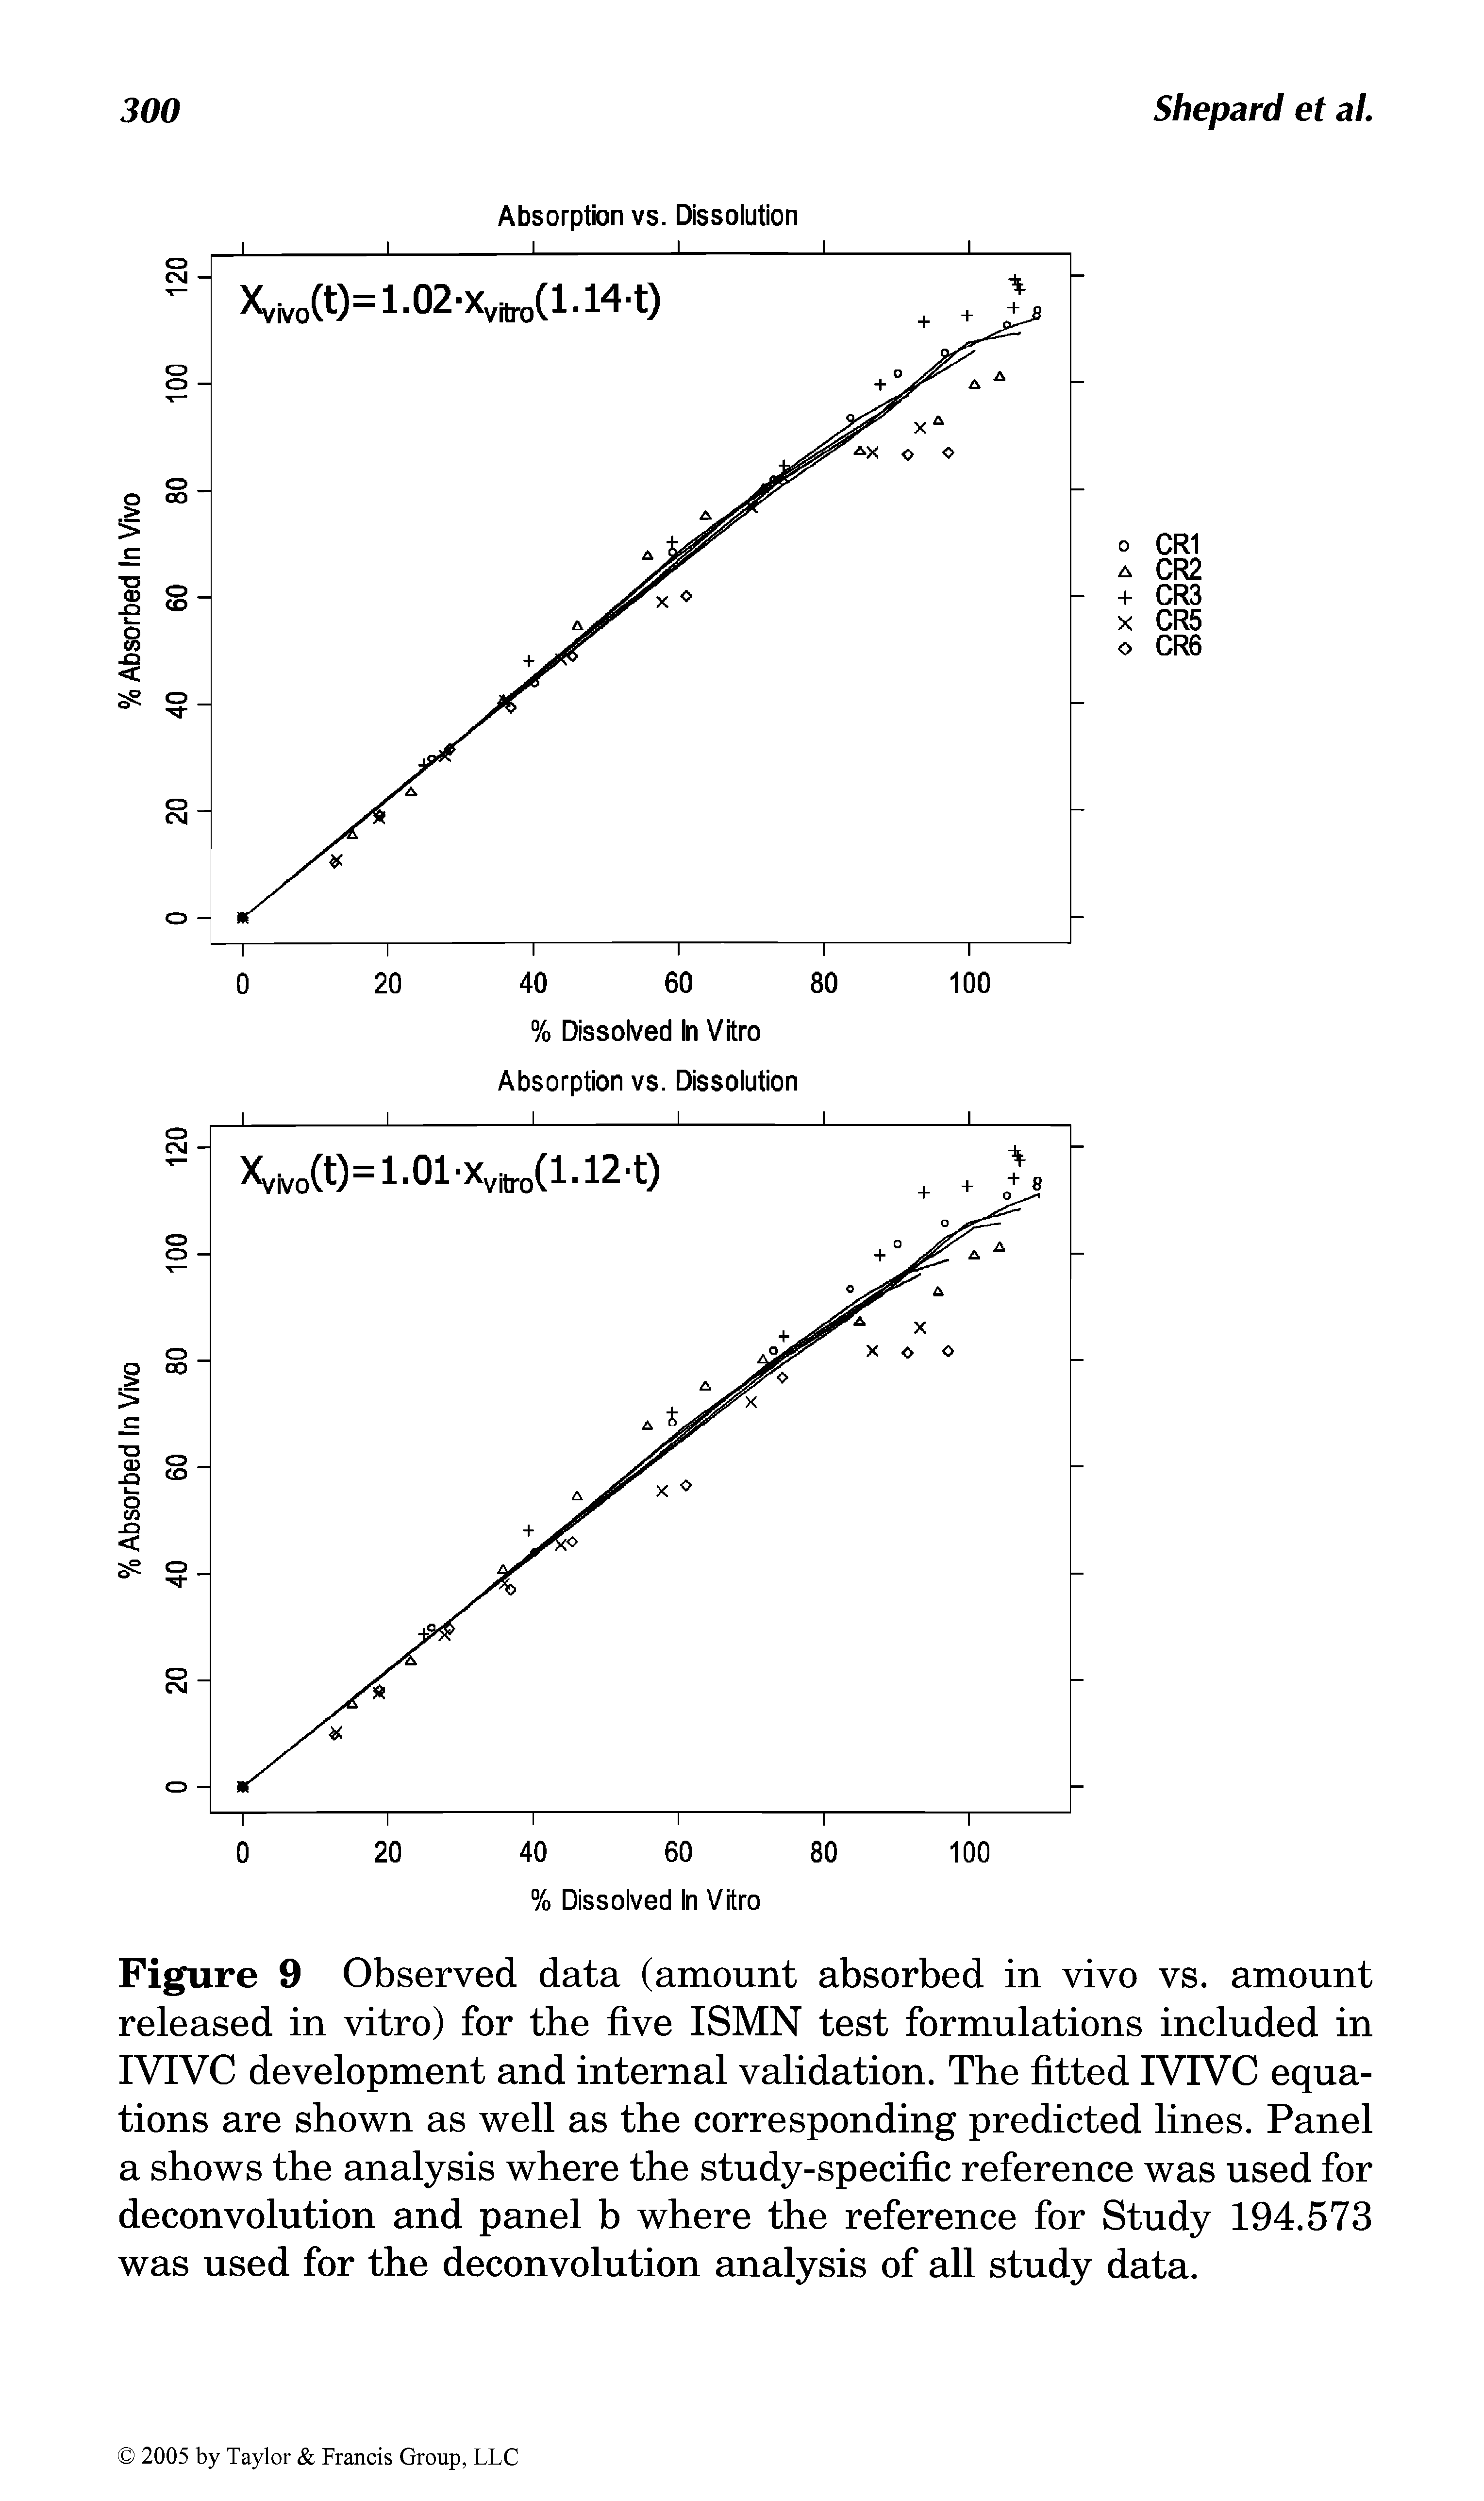 Figure 9 Observed data (amount absorbed in vivo vs. amount released in vitro) for the five ISMN test formulations included in IVIVC development and internal validation. The fitted IVIVC equations are shown as well as the corresponding predicted lines. Panel a shows the analysis where the study-specific reference was used for deconvolution and panel b where the reference for Study 194.573 was used for the deconvolution analysis of all study data.